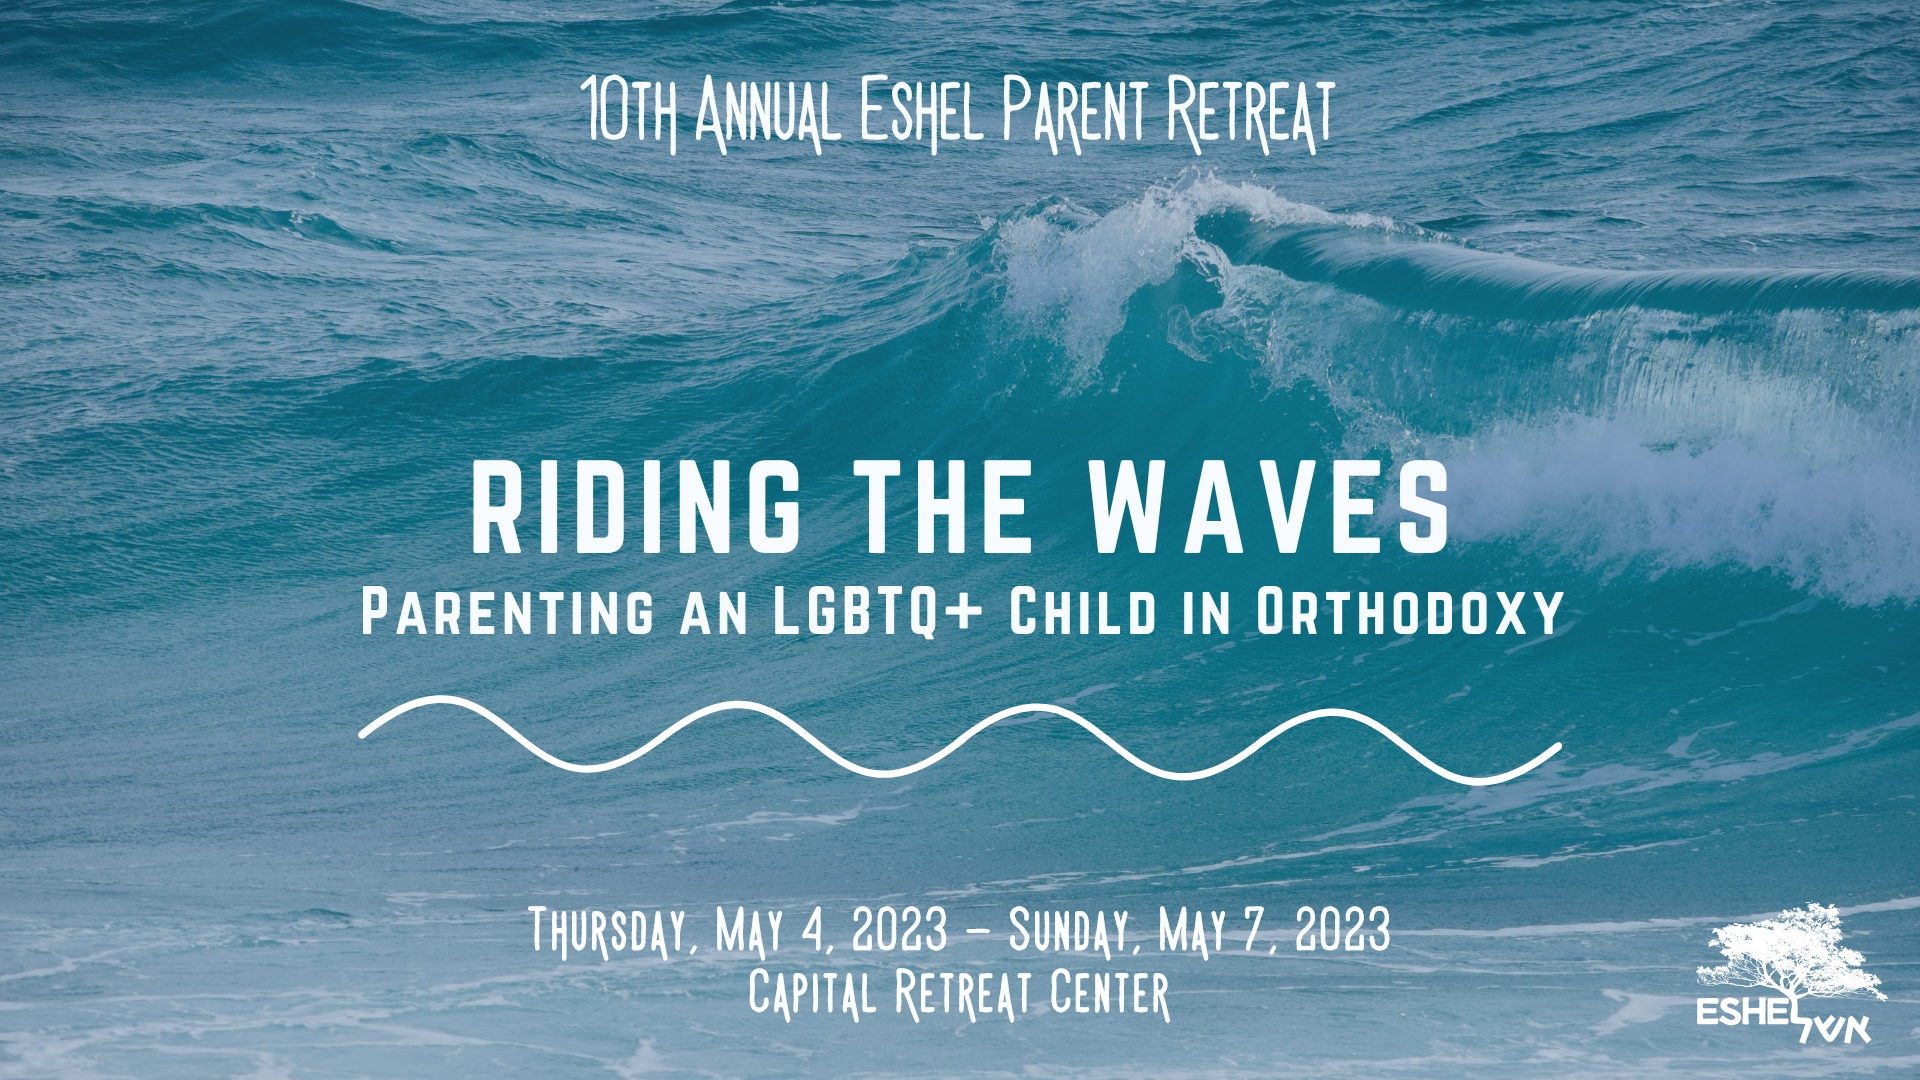 10th Annual Eshel Parent Retreat 2023 | Riding the Waves: Parenting an LGBTQ+ Child in Orthodoxy | Thursday May 4 - Sunday May 7, Capital Retreat Center